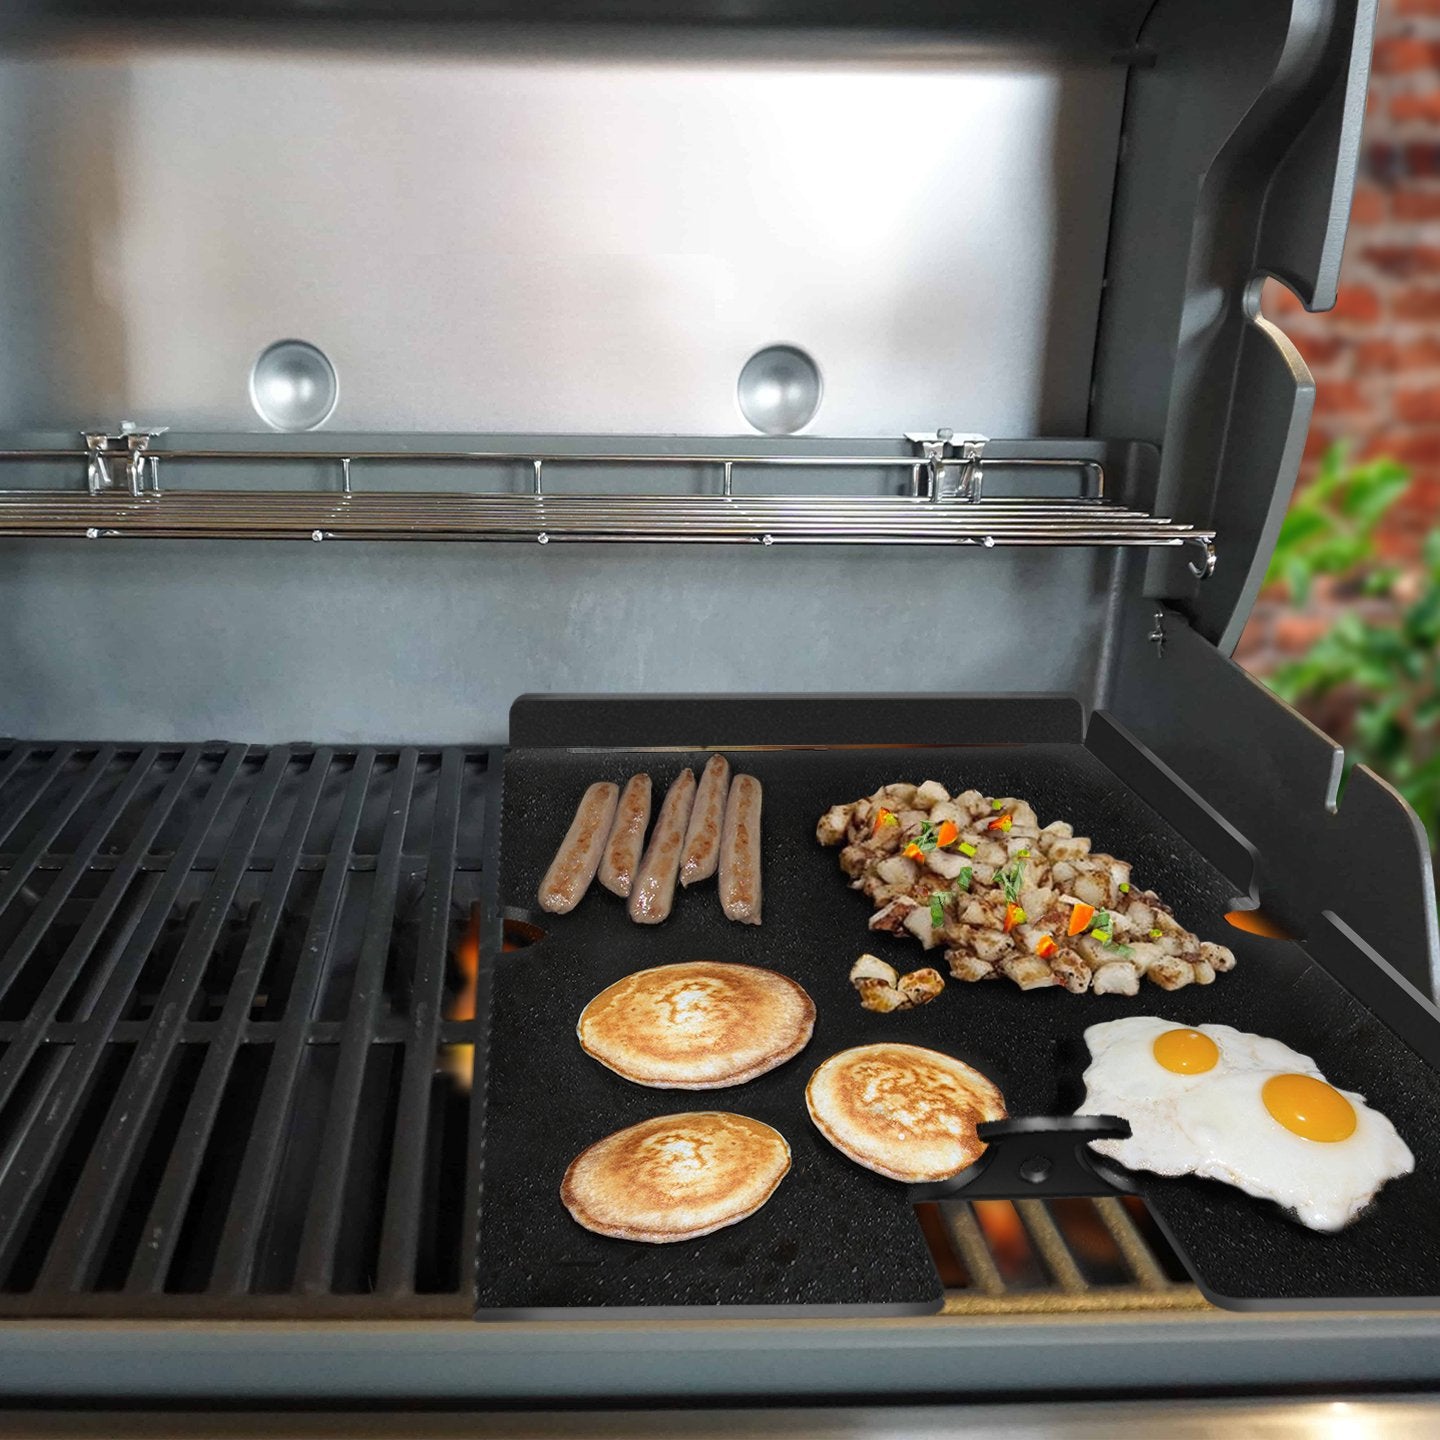 Grill Grate Replacements Plancha Griddles gas, electric or charcoal grills